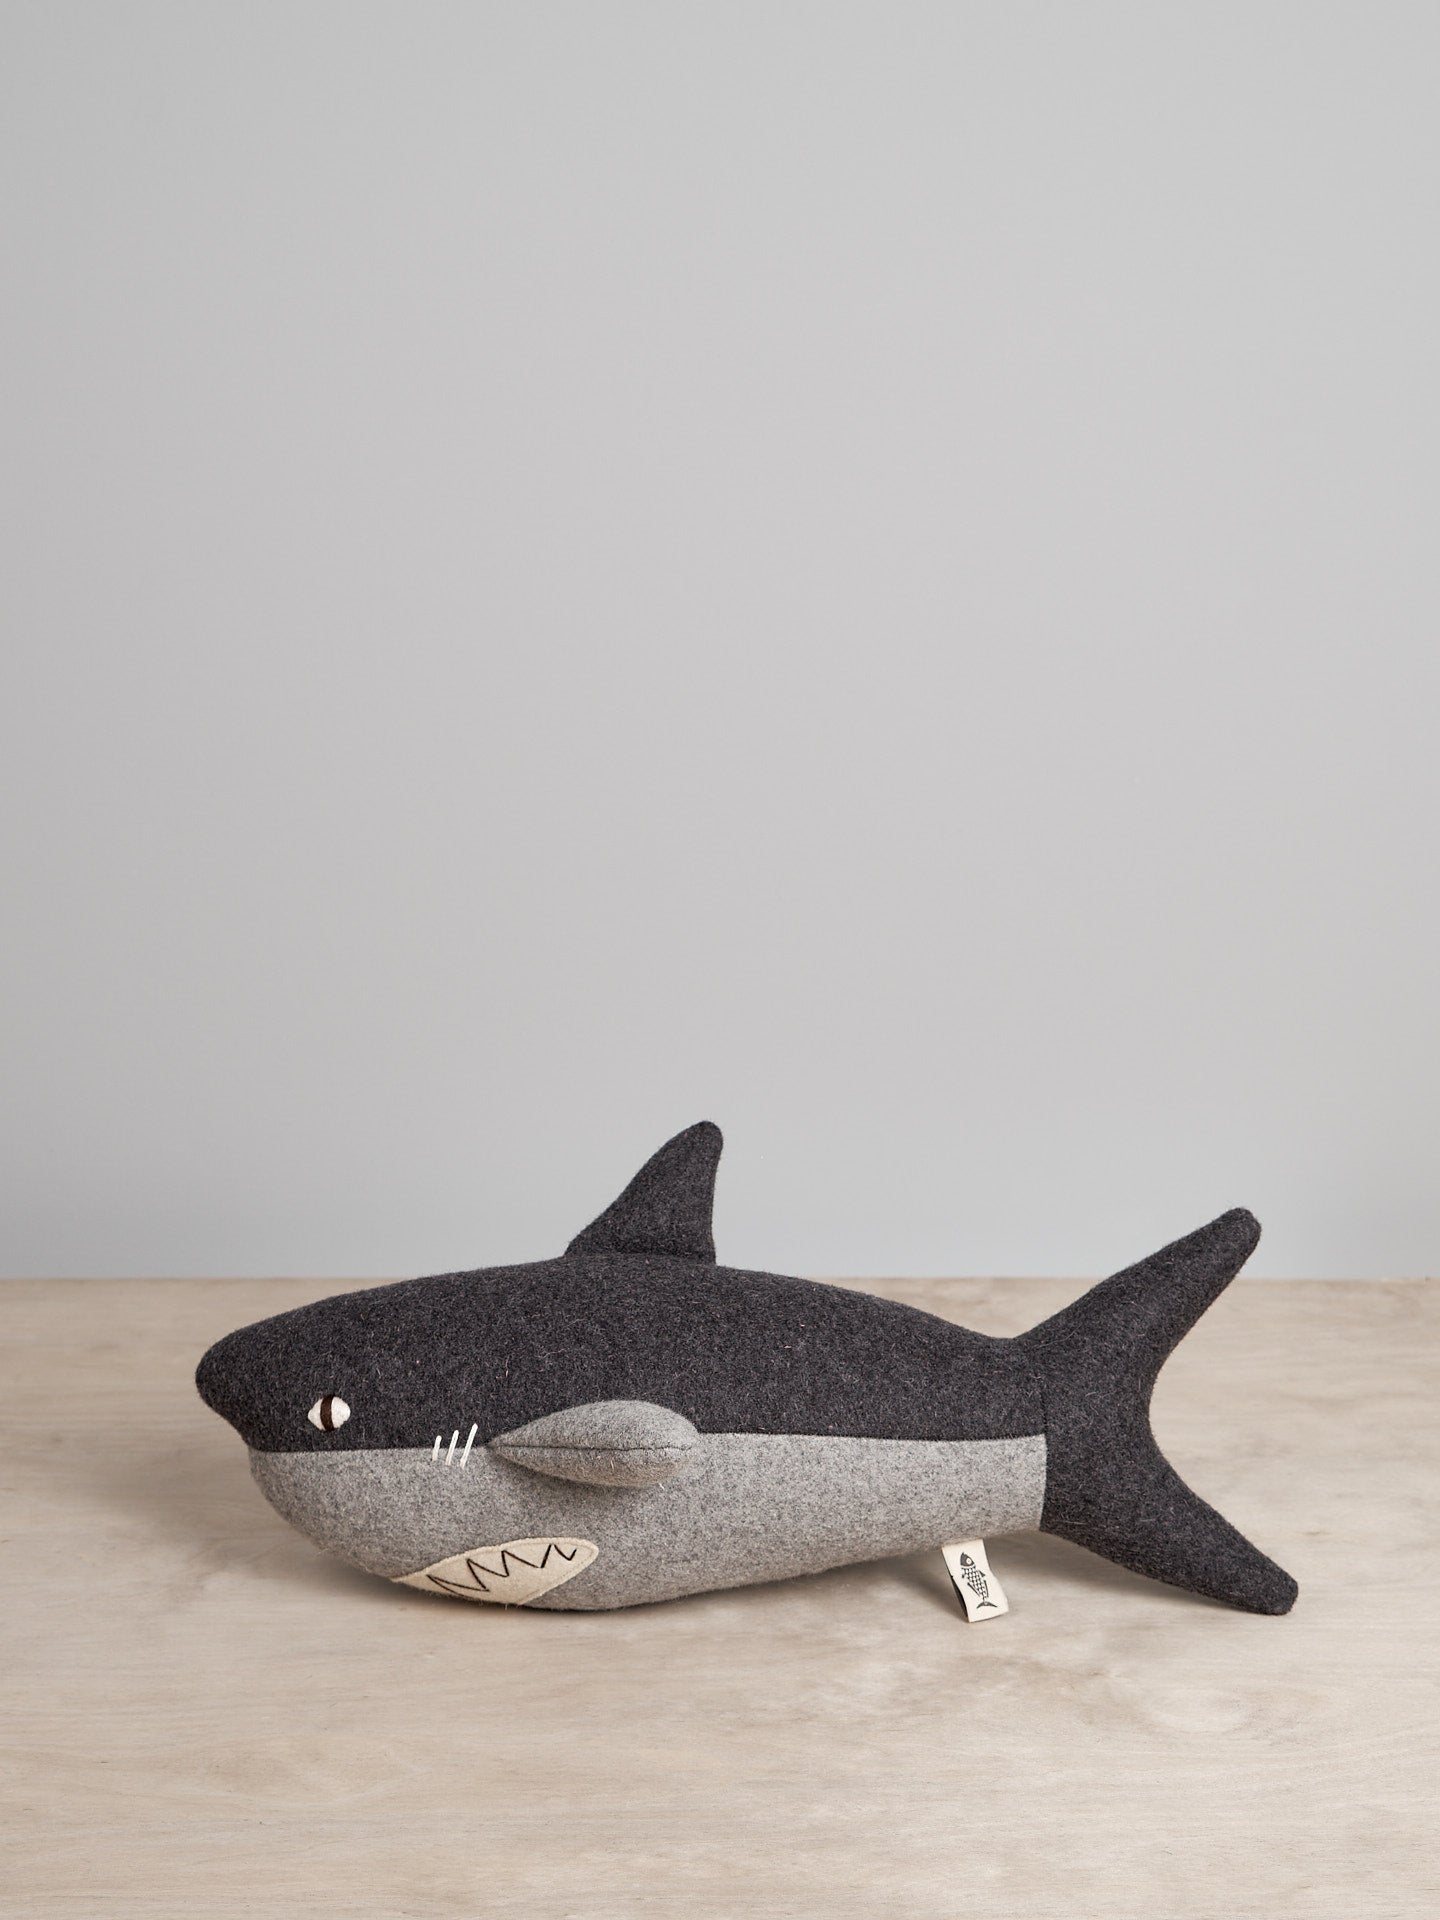 A BEN, the Great White Shark stuffed animal on a wooden table. (Brand: Carapau)